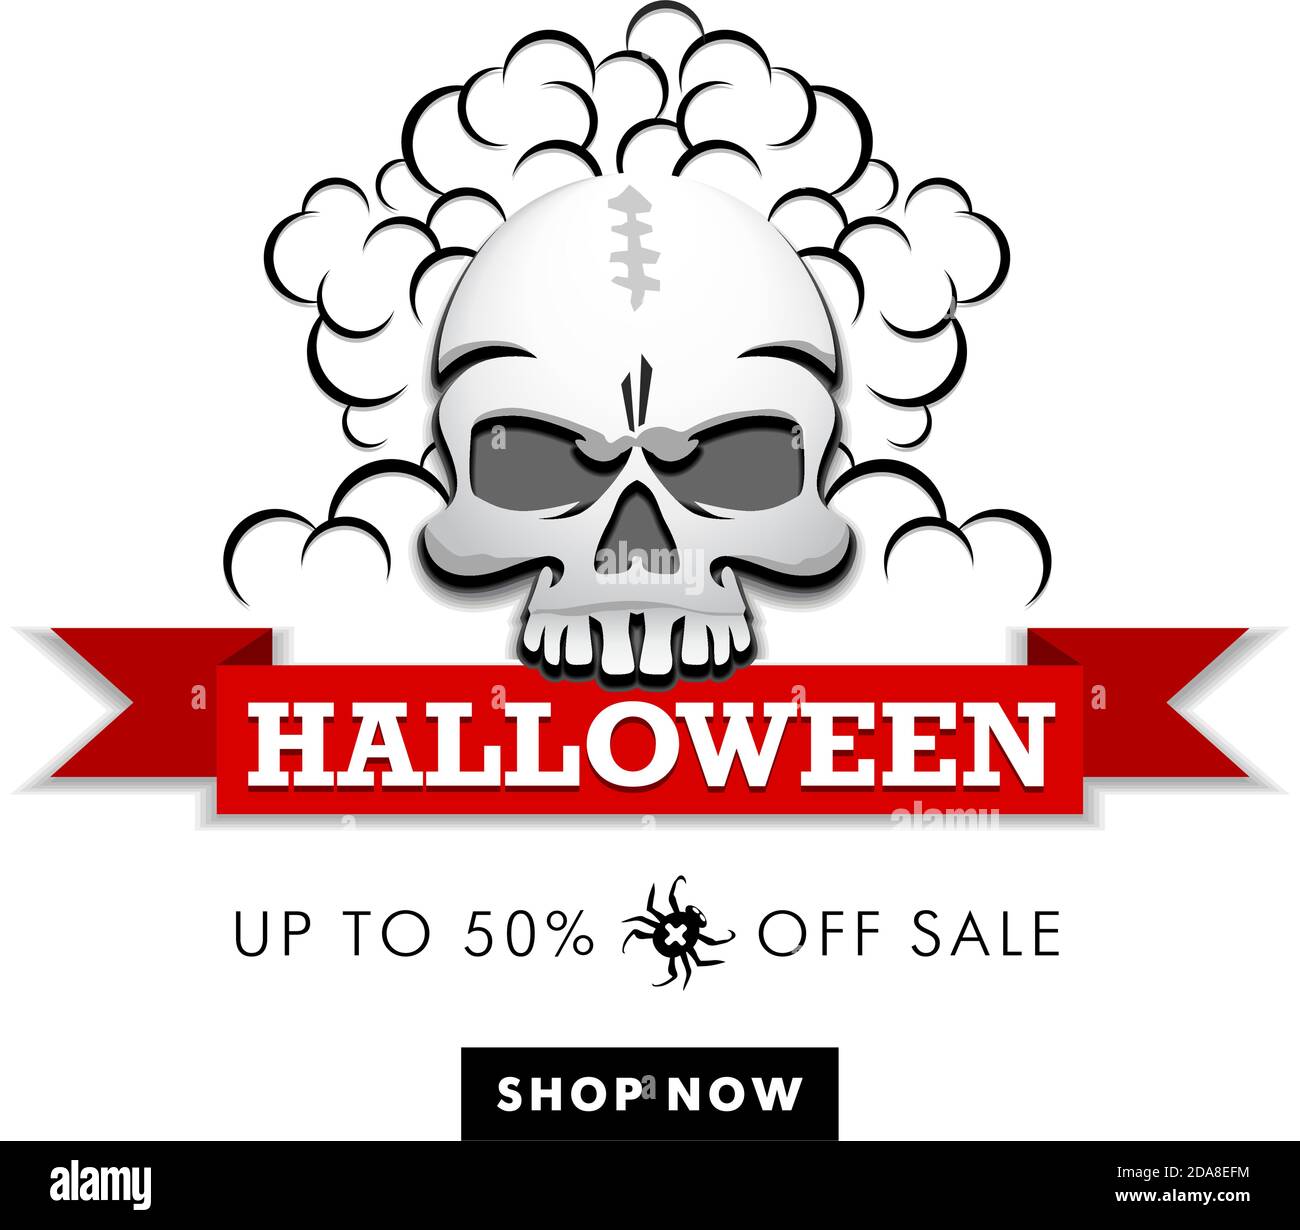 Halloween Sale - Human skull holding banner in his teeth. Buy 50% off shop now. Illustration, web icon, vector Stock Vector